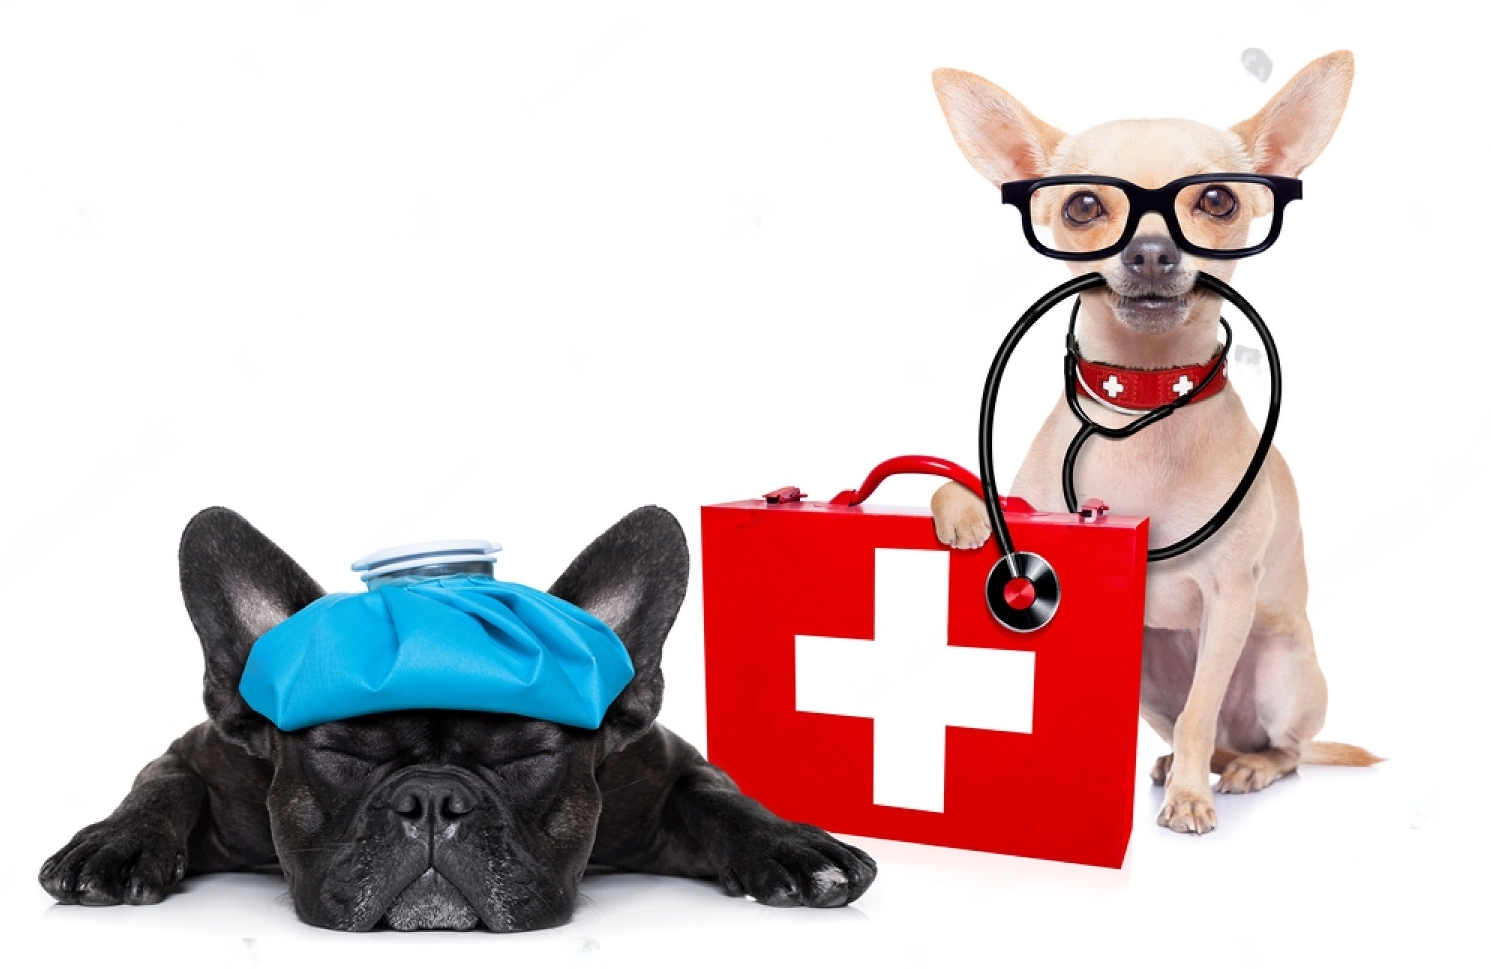 First aid for the dog